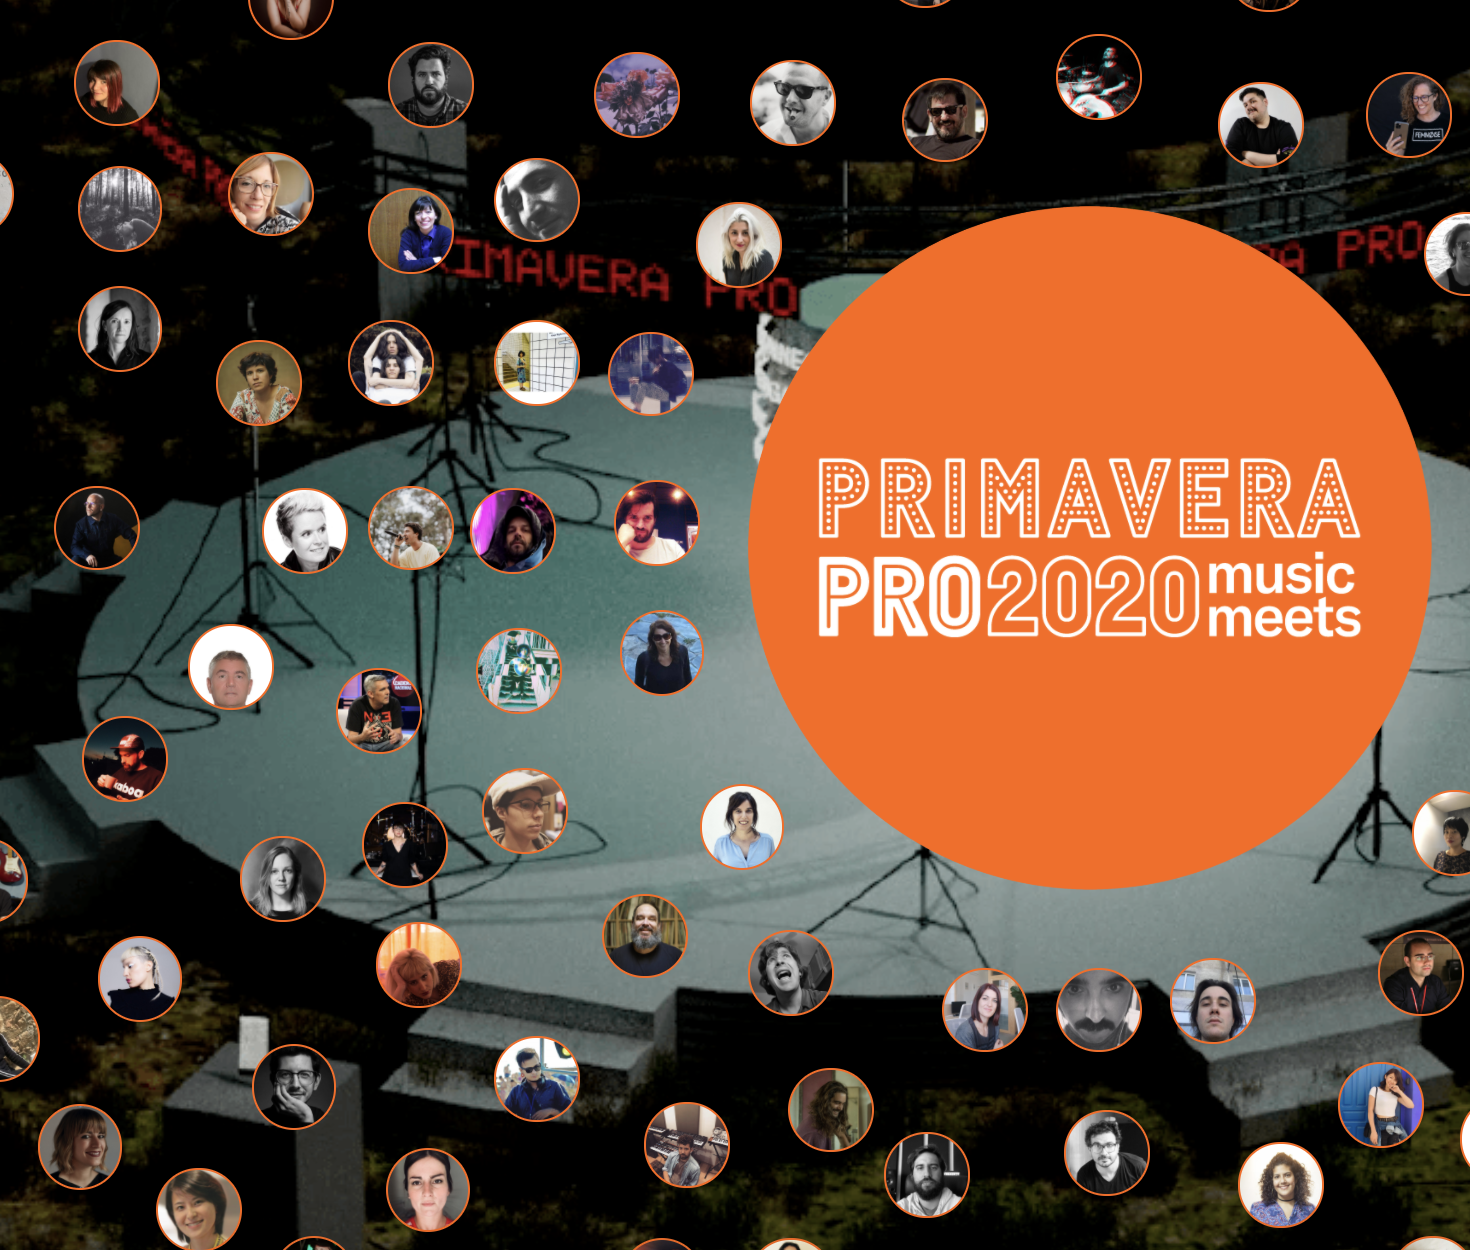 Primavera Sound Rt Primaverapro This Was Day 1 Of Pro Remember That If You Missed Any Talk It Is Available On Our Online Platform T Co Twitter